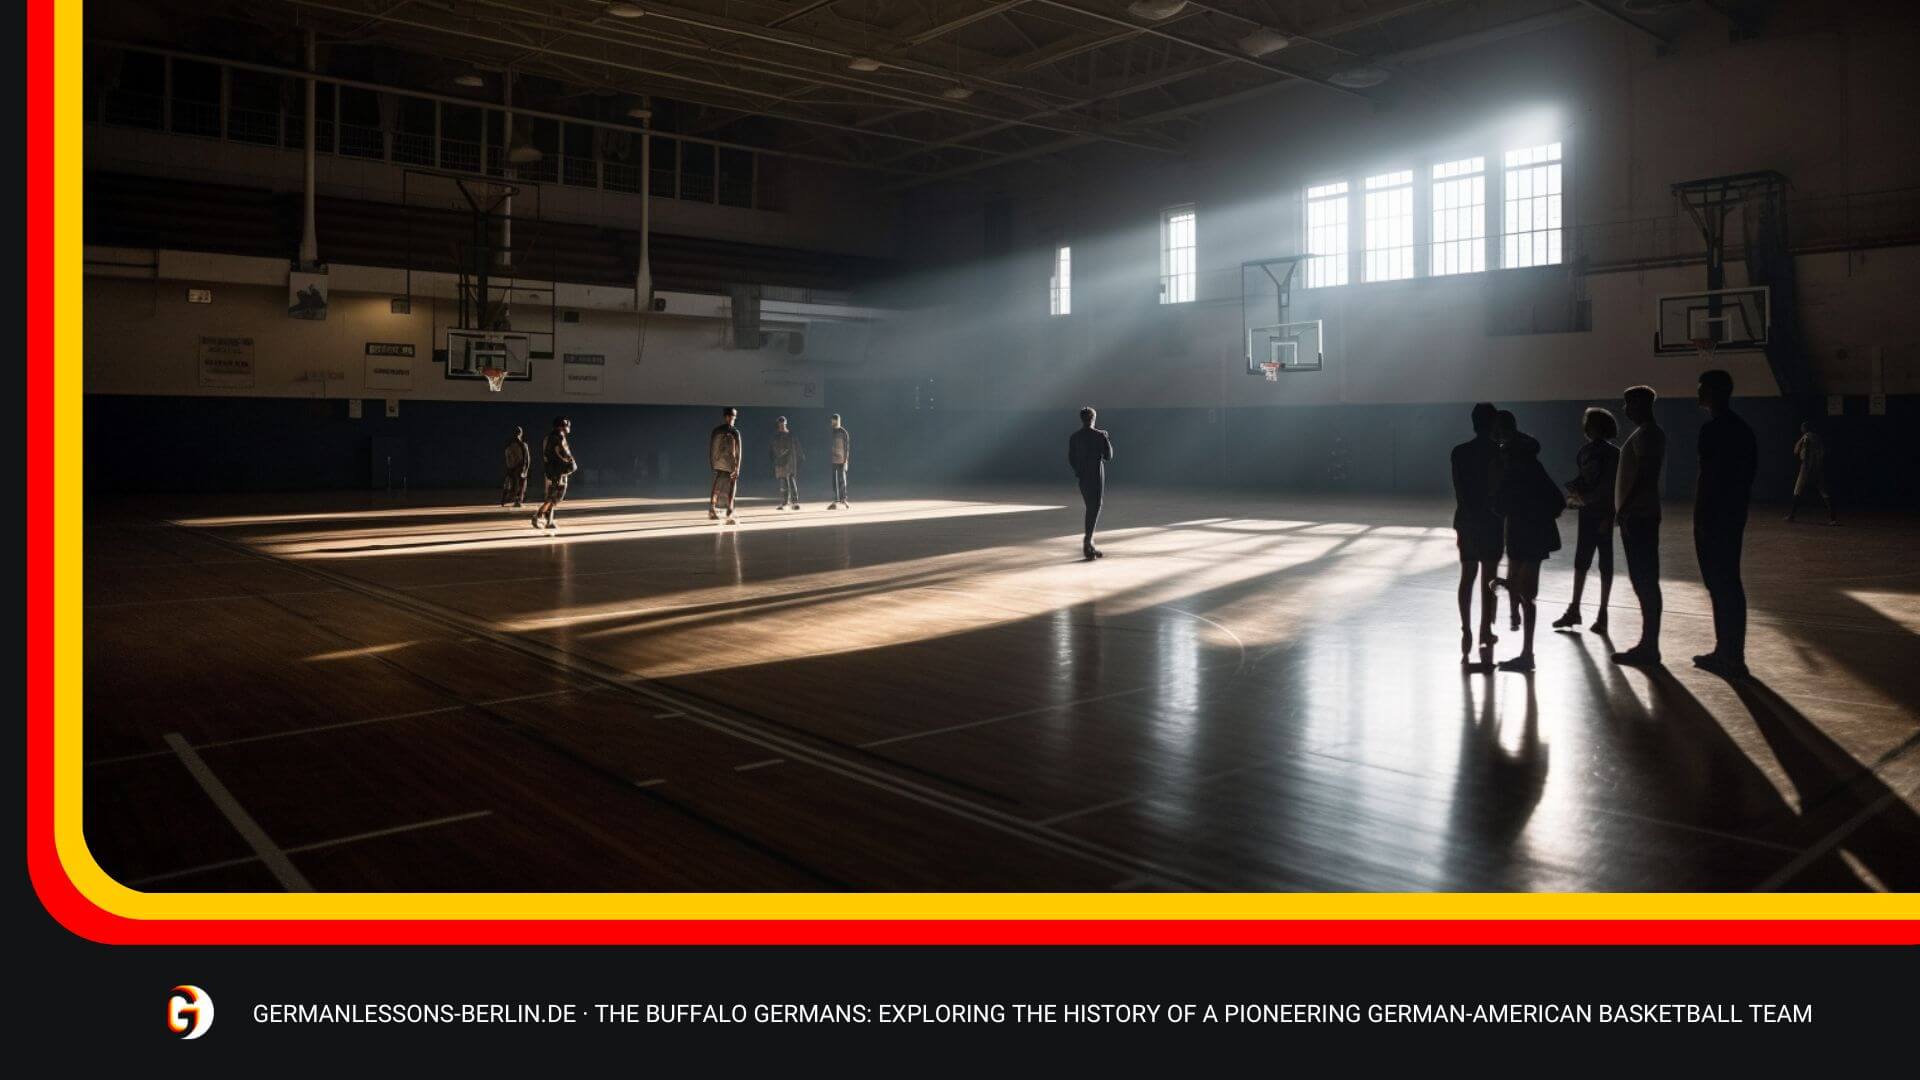 The Buffalo Germans: Exploring The History Of A Pioneering German-American Basketball Team